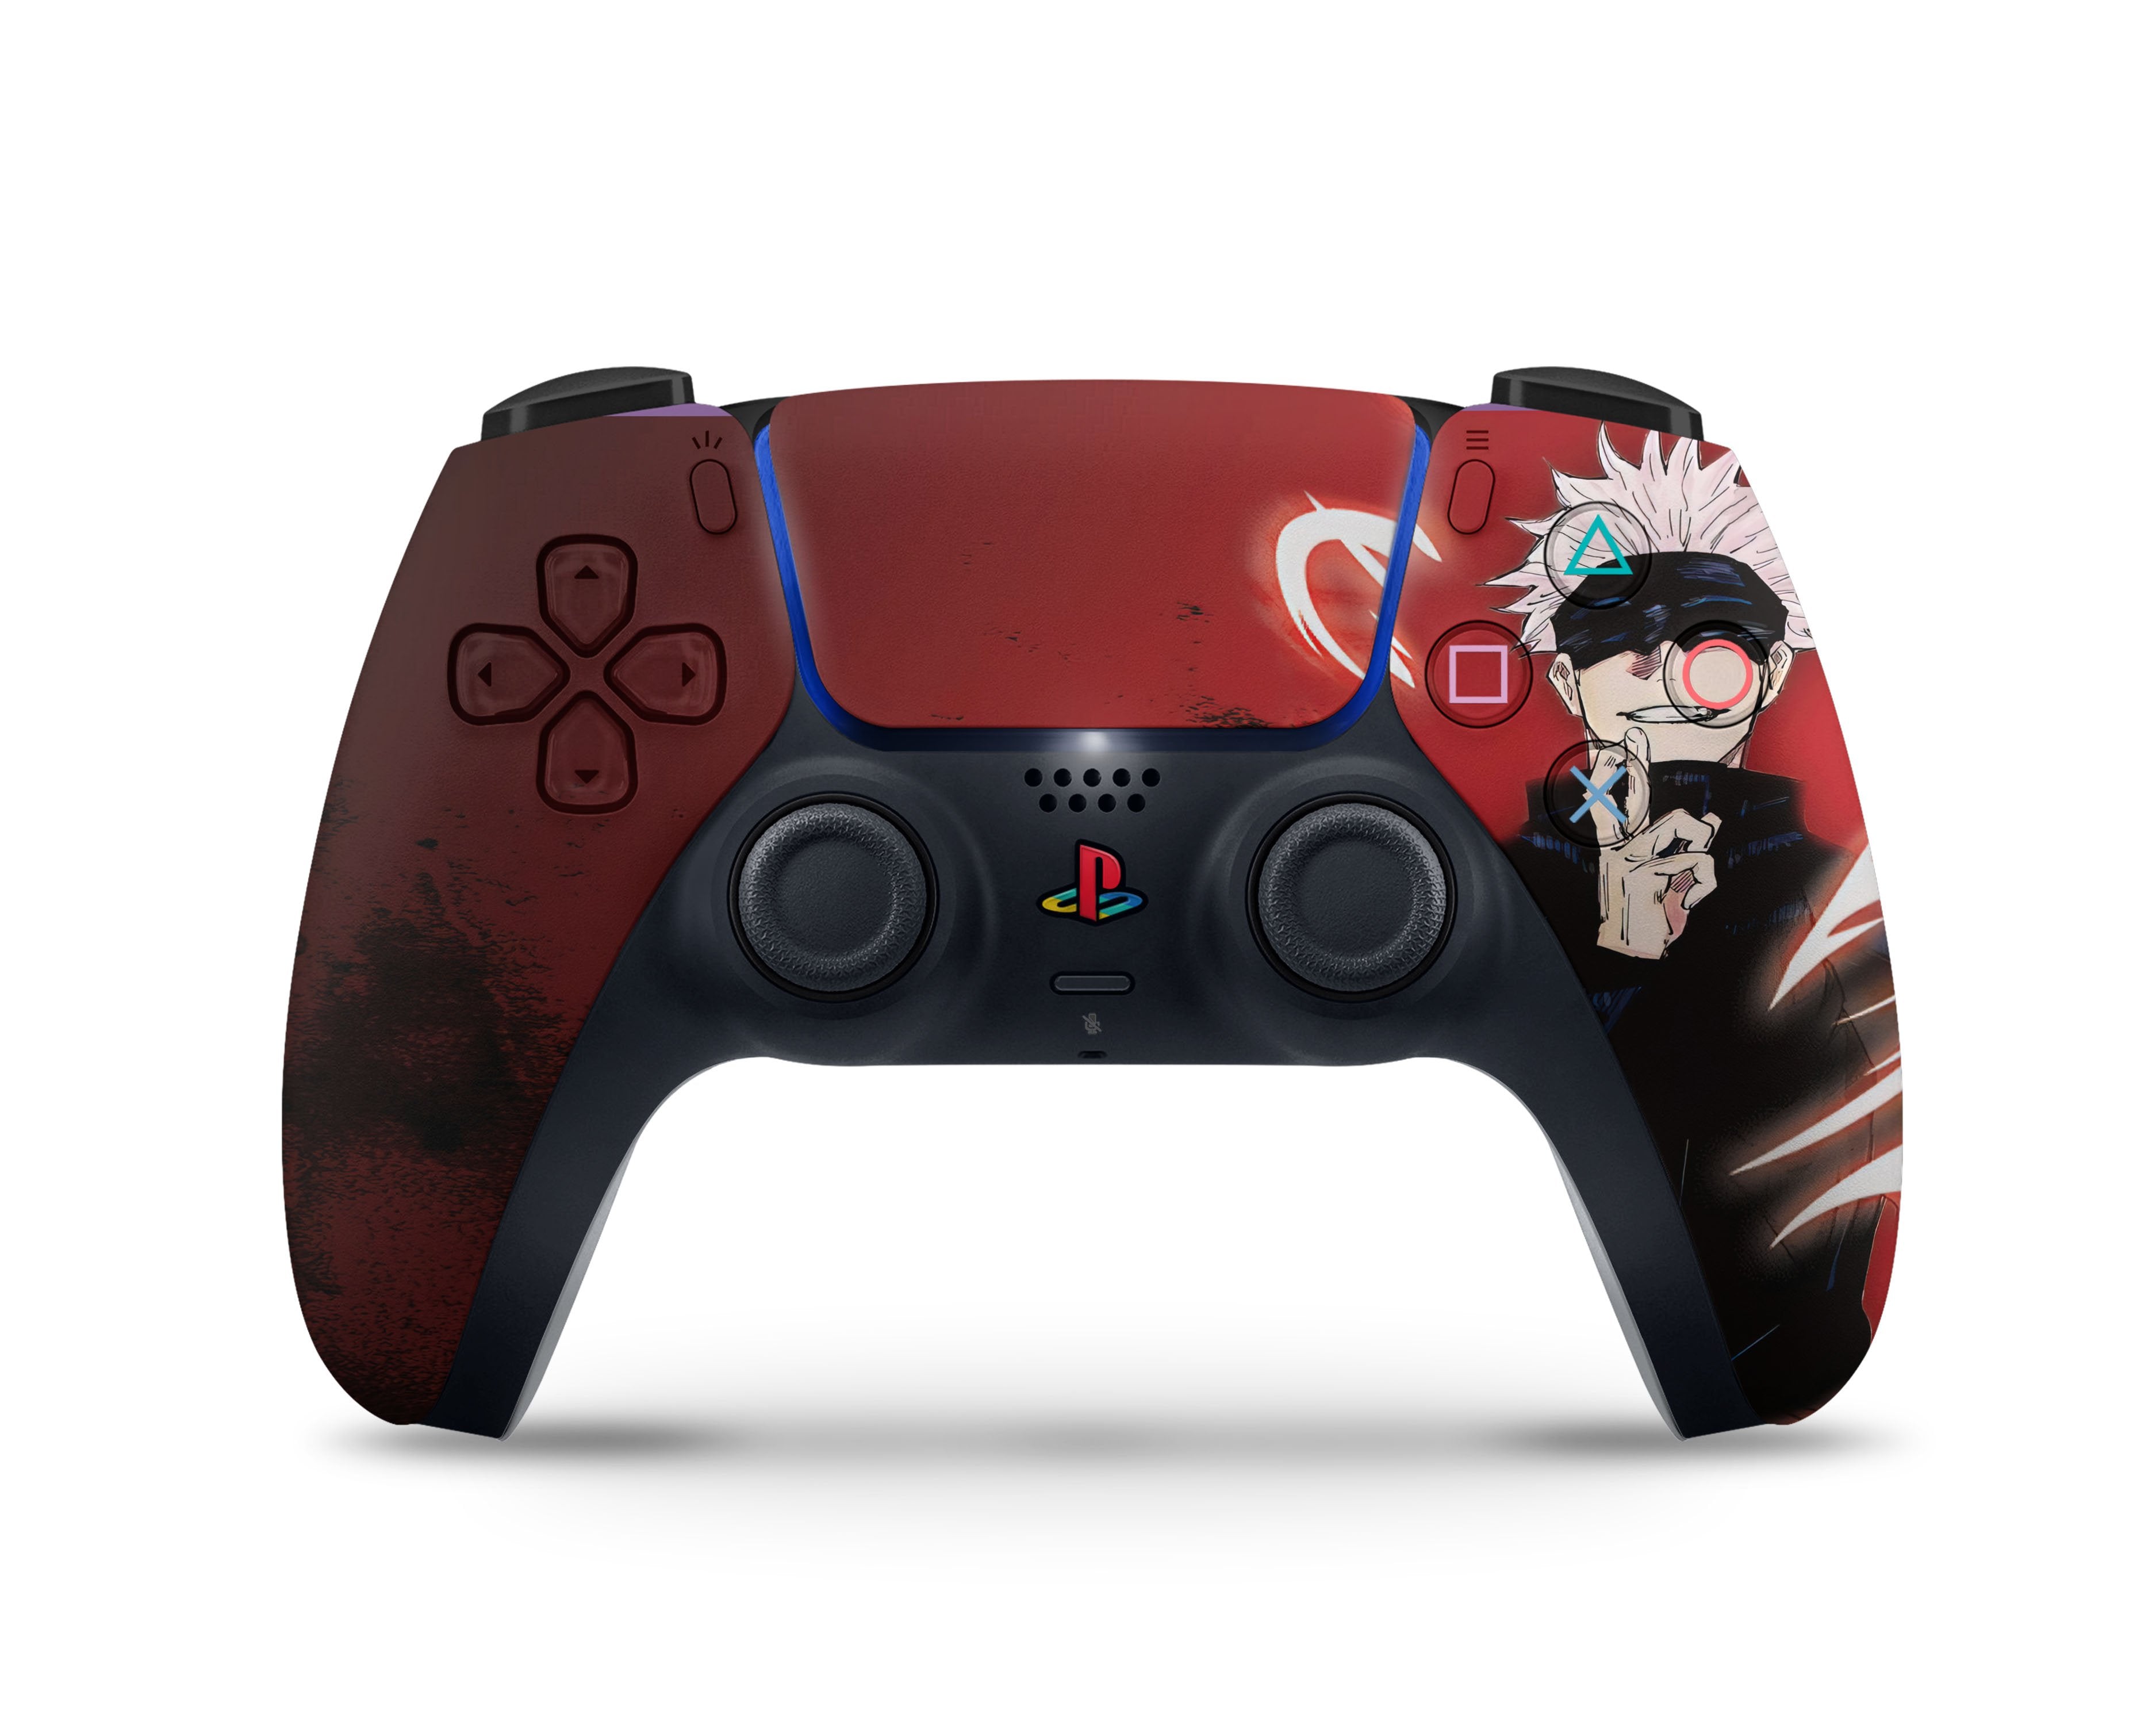 PS5 Skin Digital Edition Anime Console and Controller Vinyl Cover Skins  Wraps | eBay